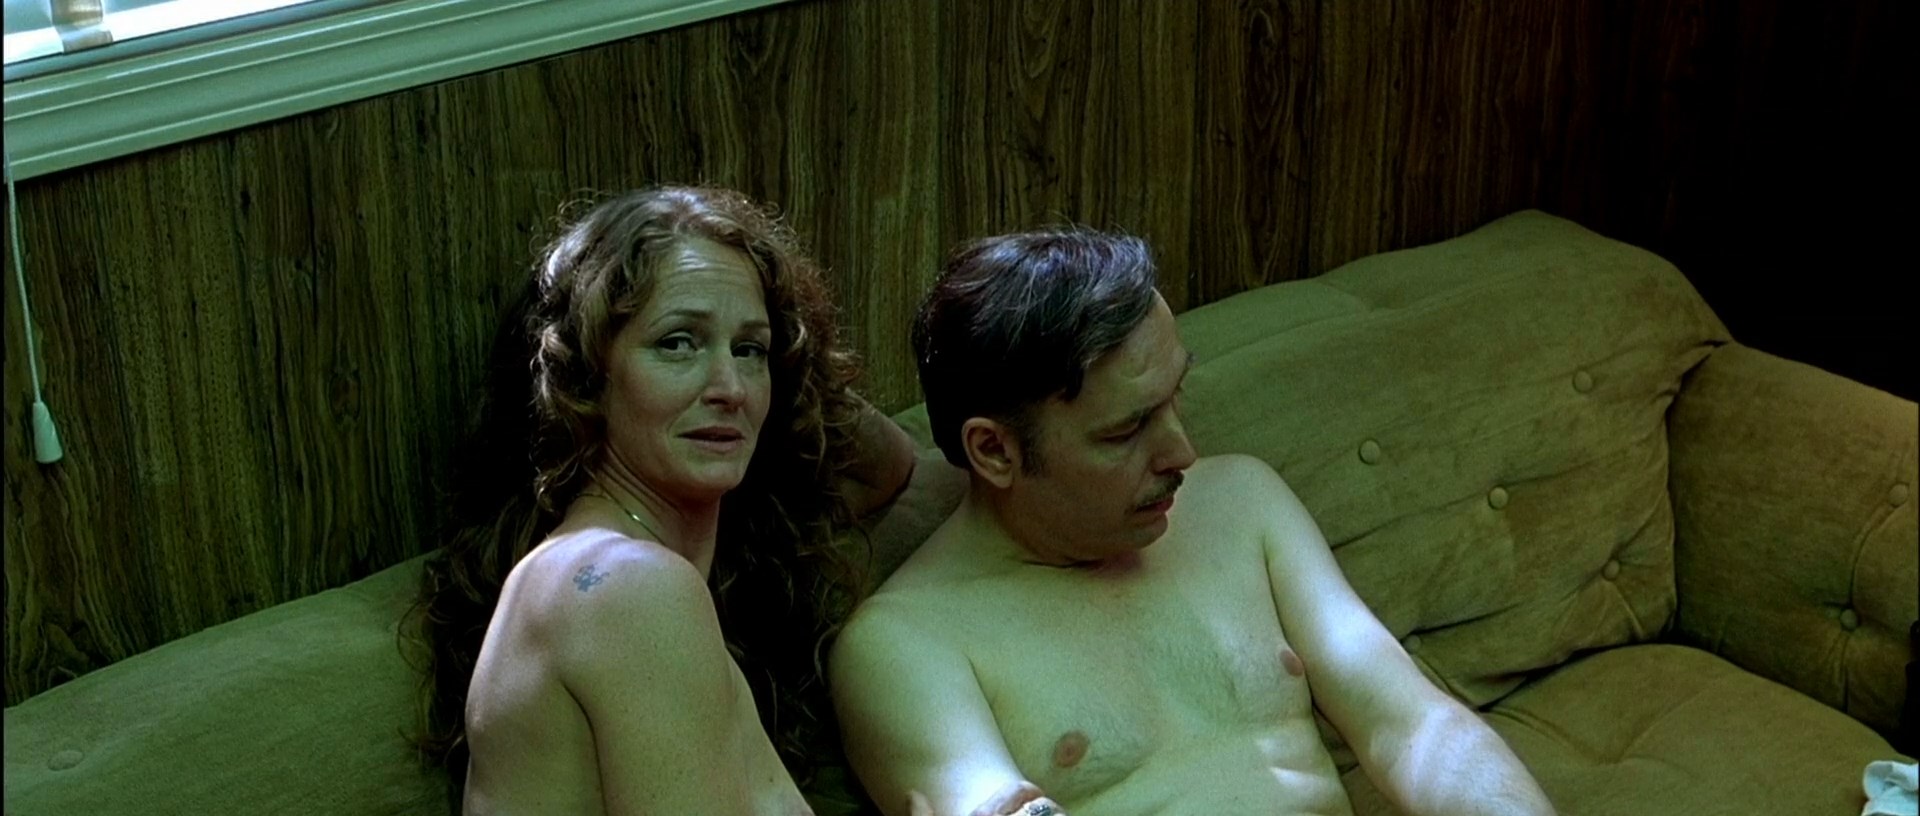 Melissa Leo is sitting naked in a sofa with some guy.